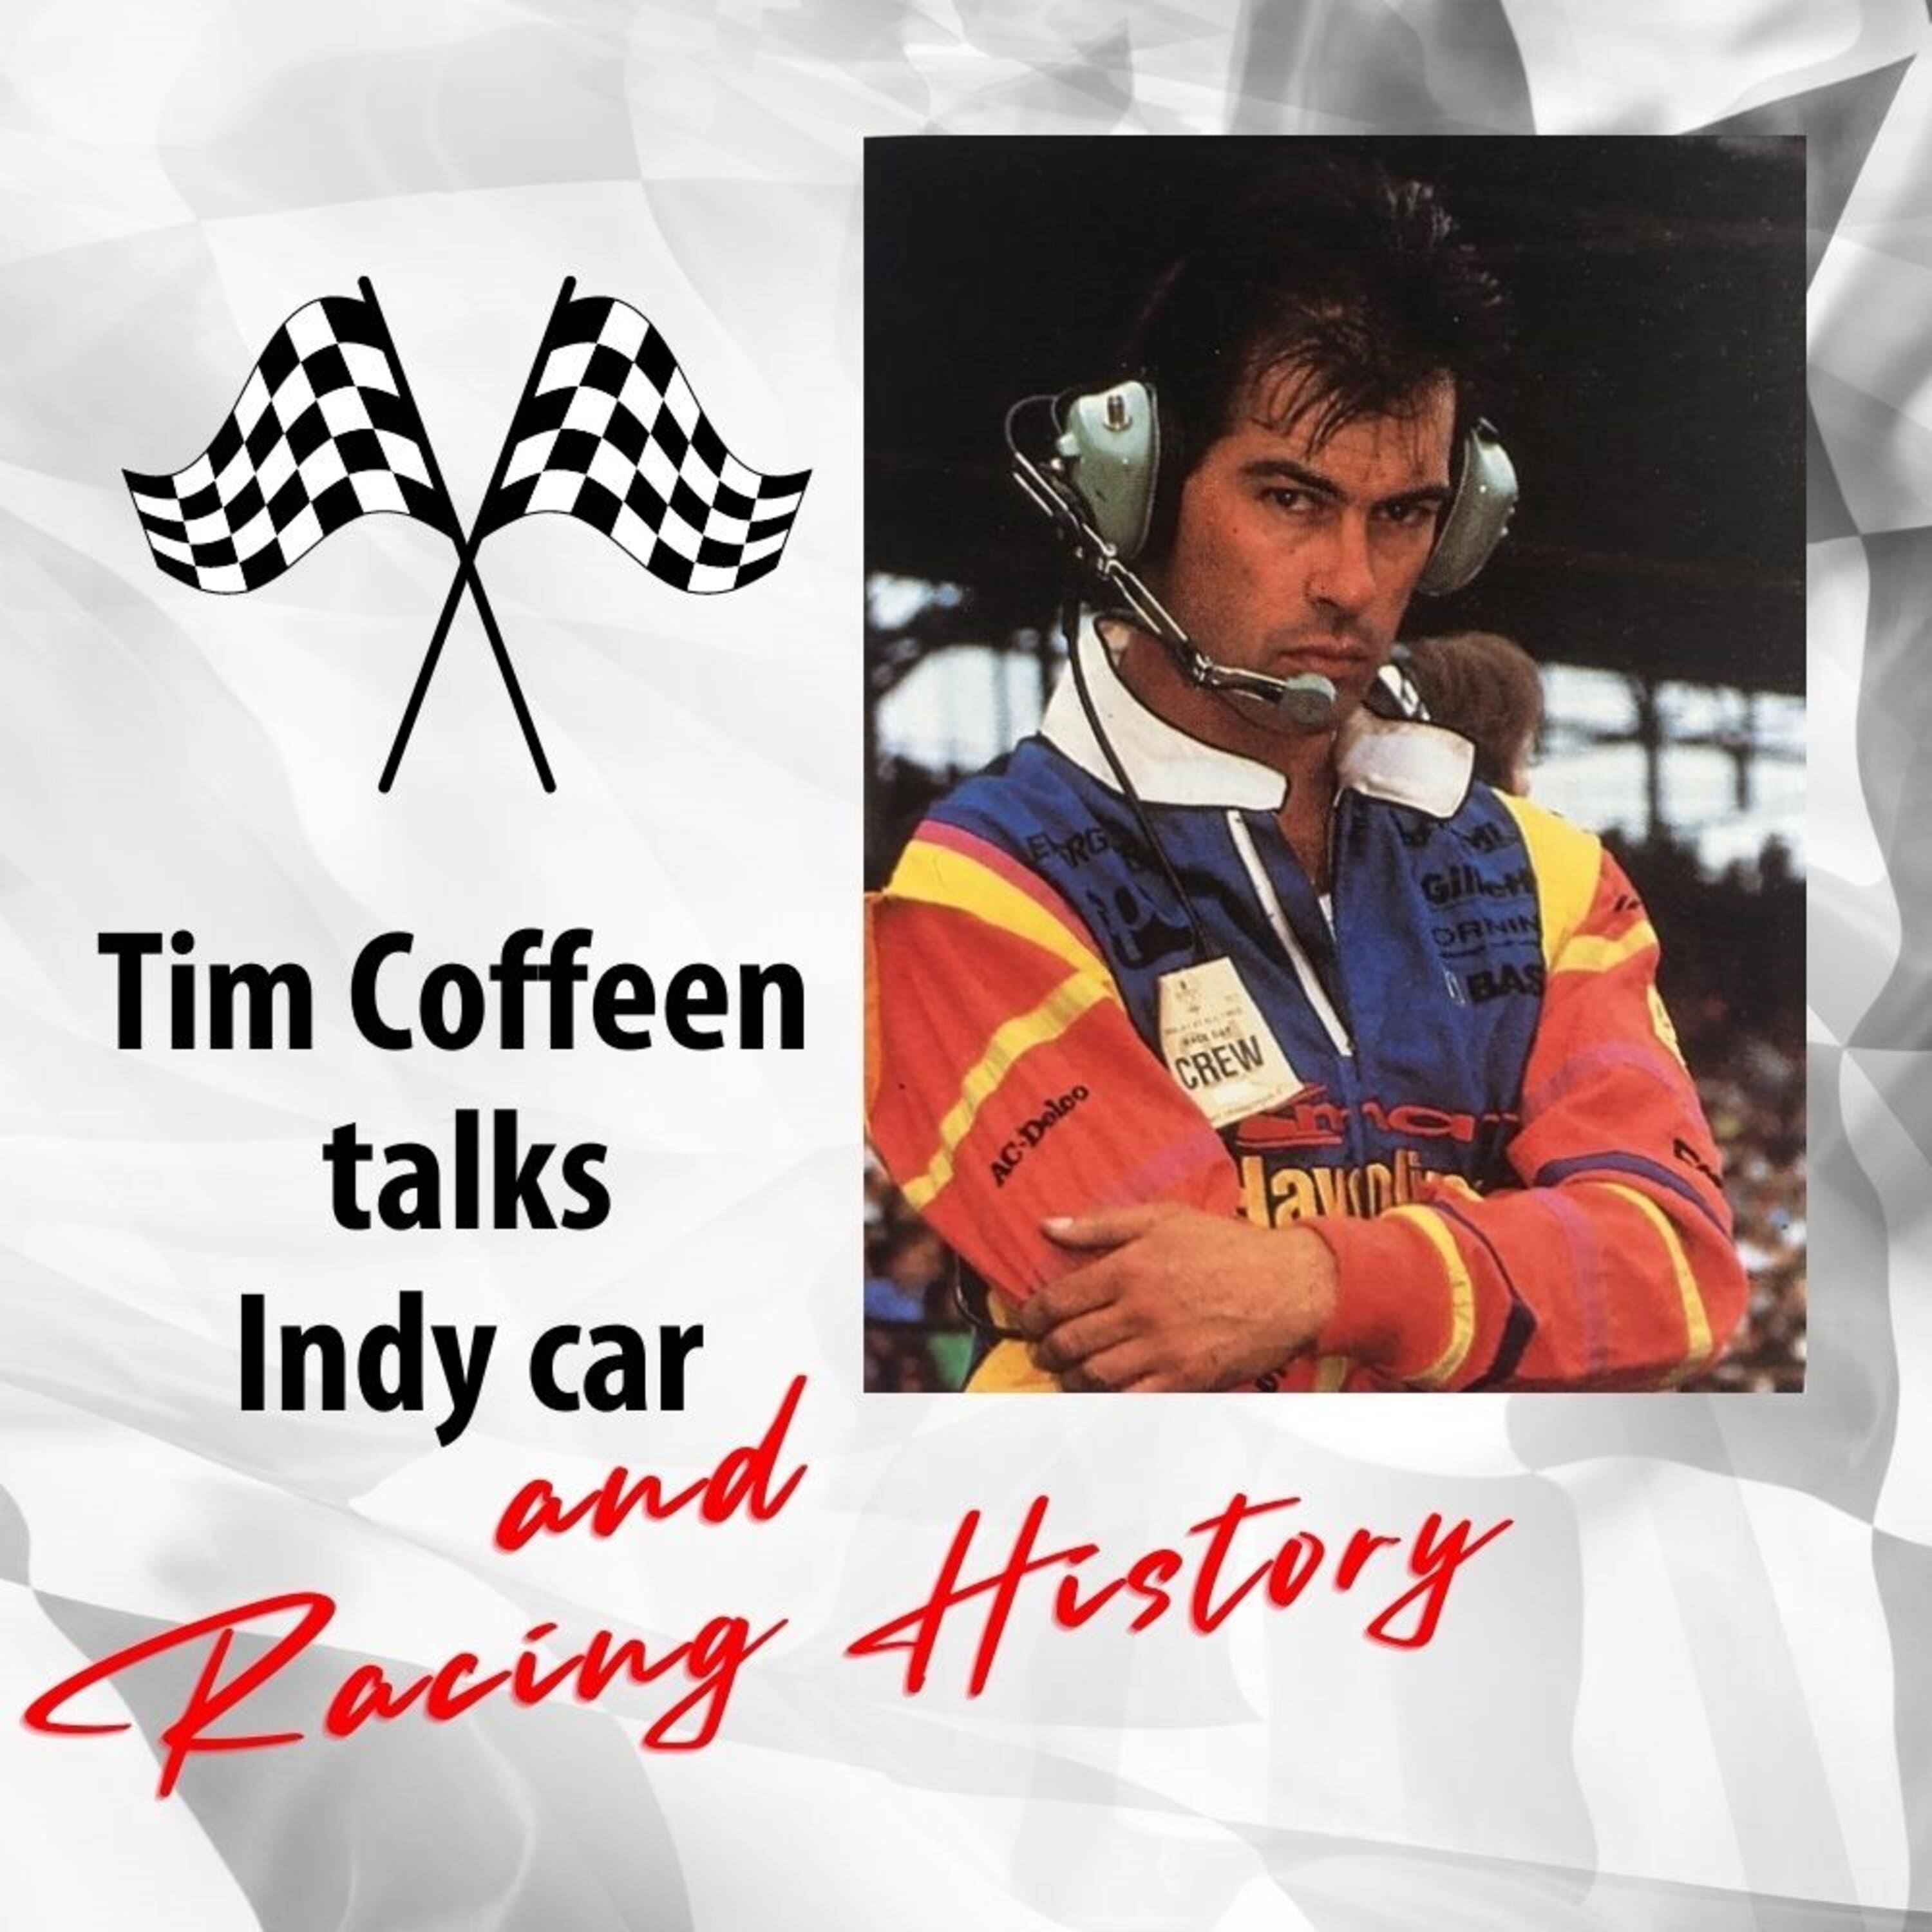 Artwork for podcast Tim Coffeen Talks Indy car and Racing History